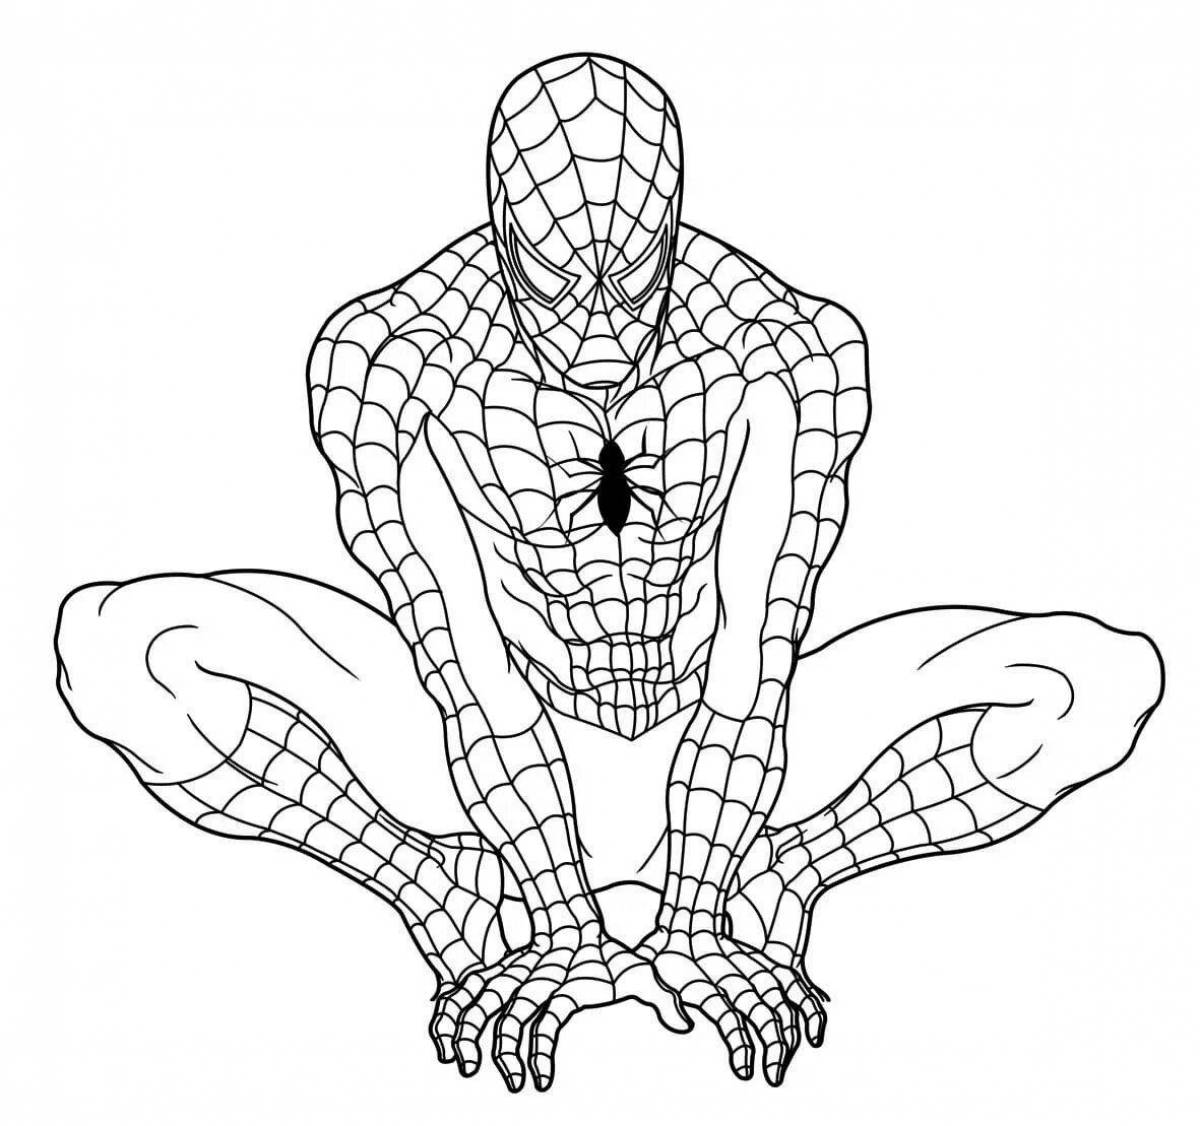 Spider-man shine coloring page